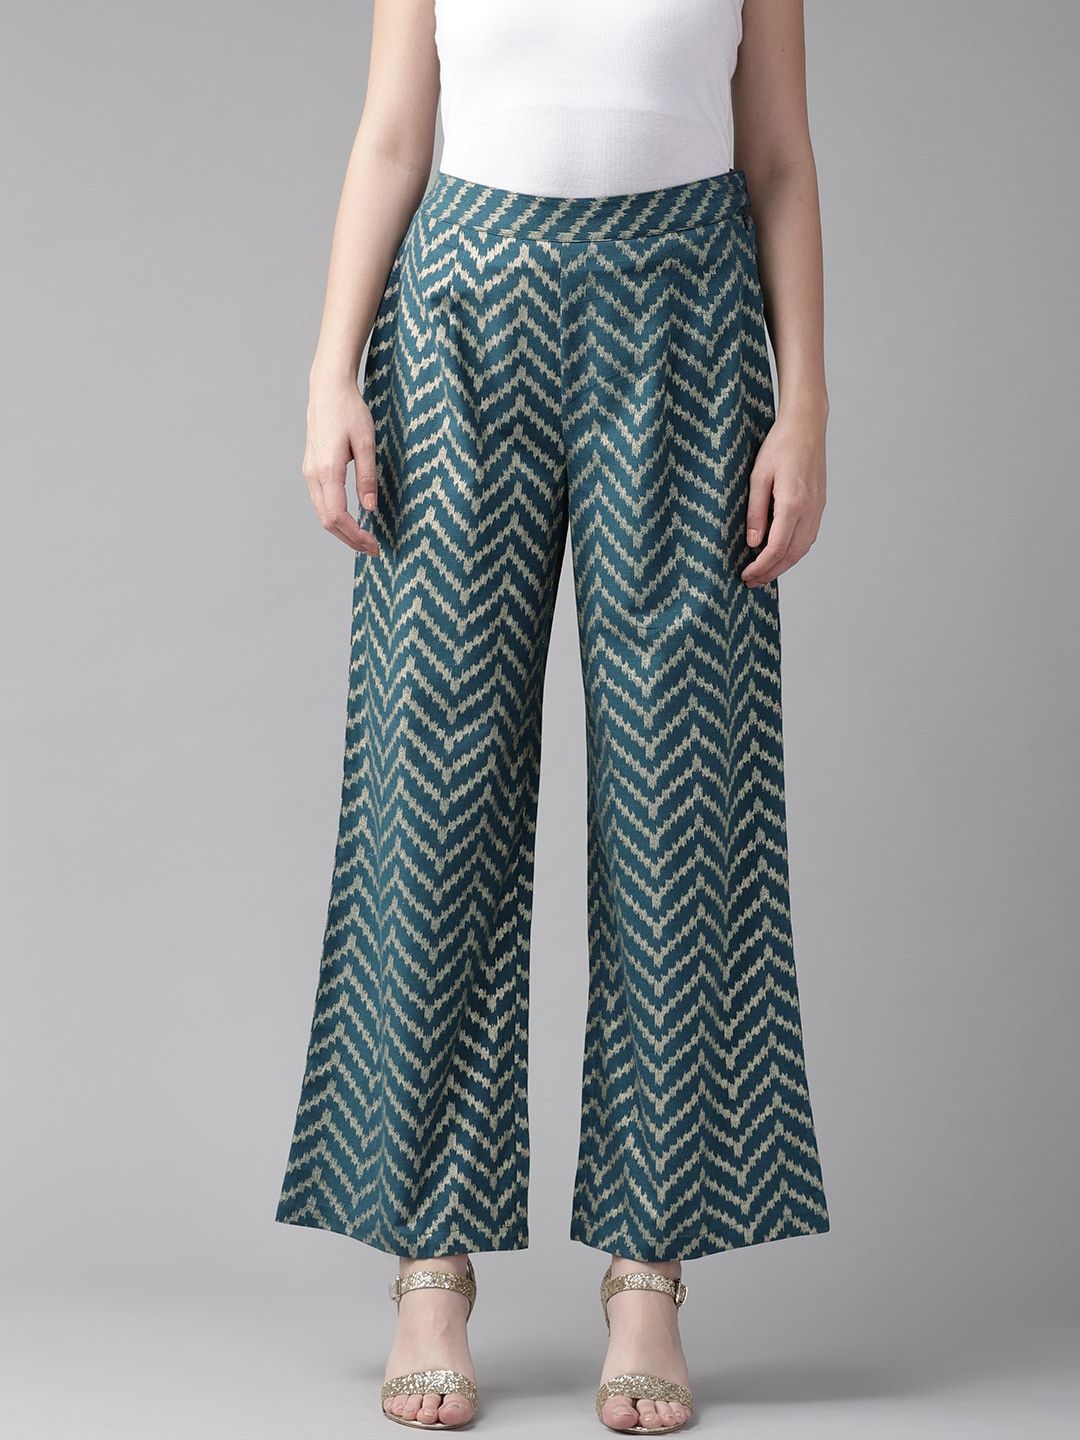 Women's  Teal Blue & Golden Printed Straight Palazzos - AKS